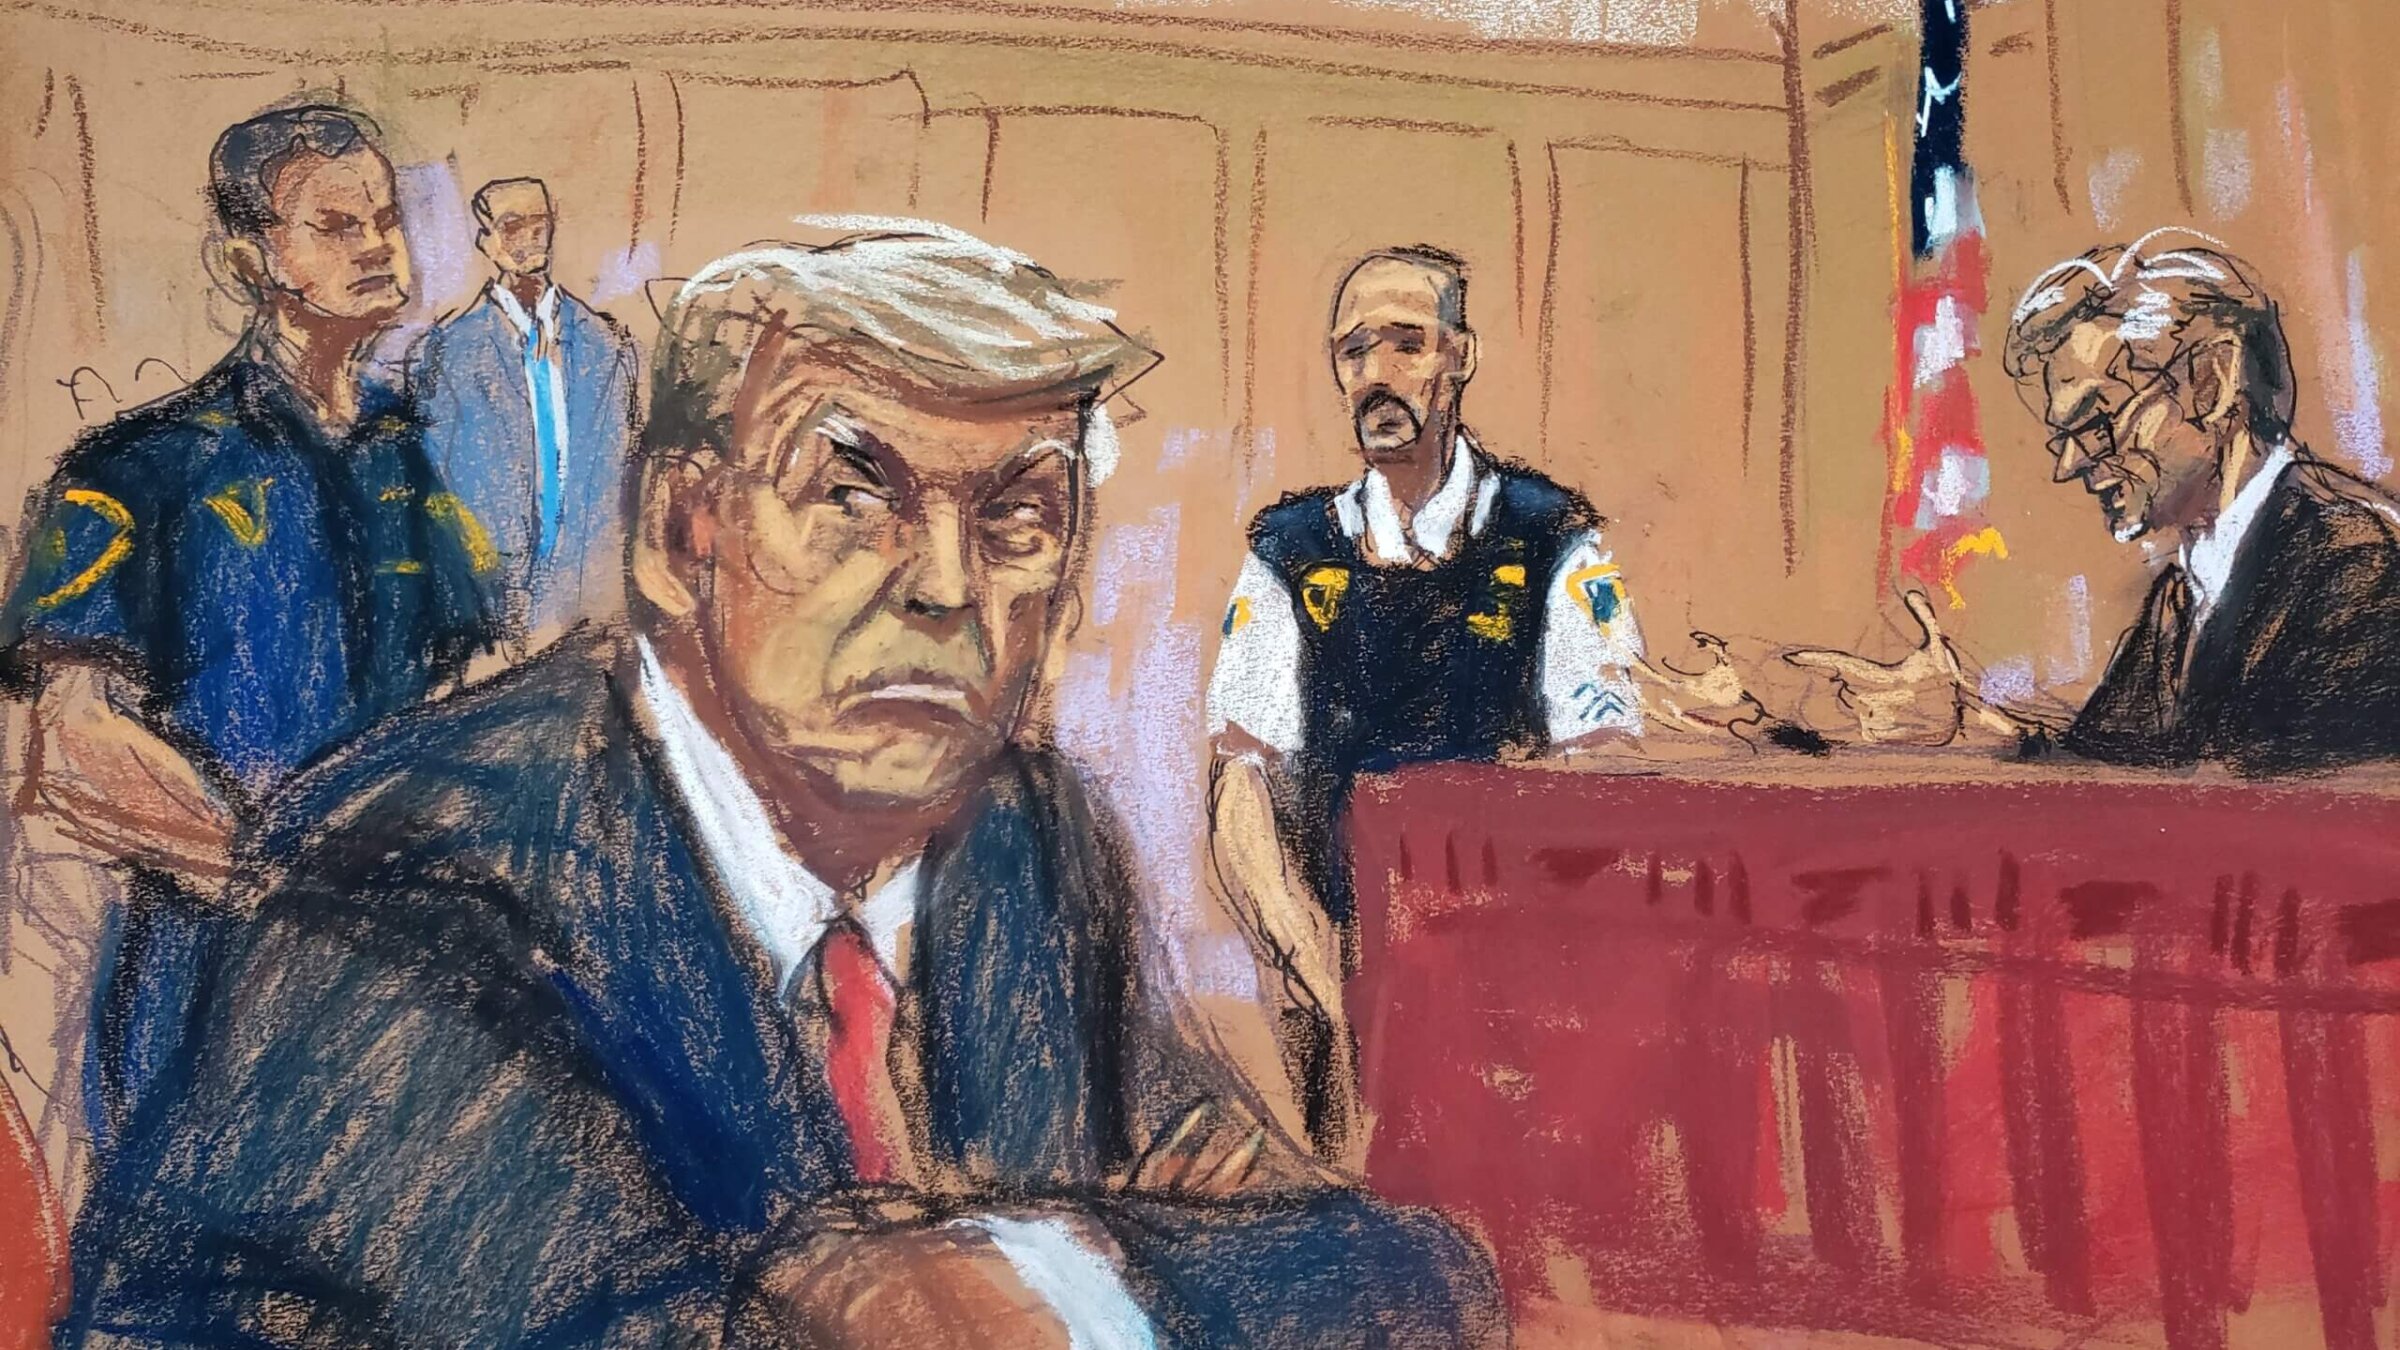 A courtroom artist's Trump sketch is the latest New Yorker cover The